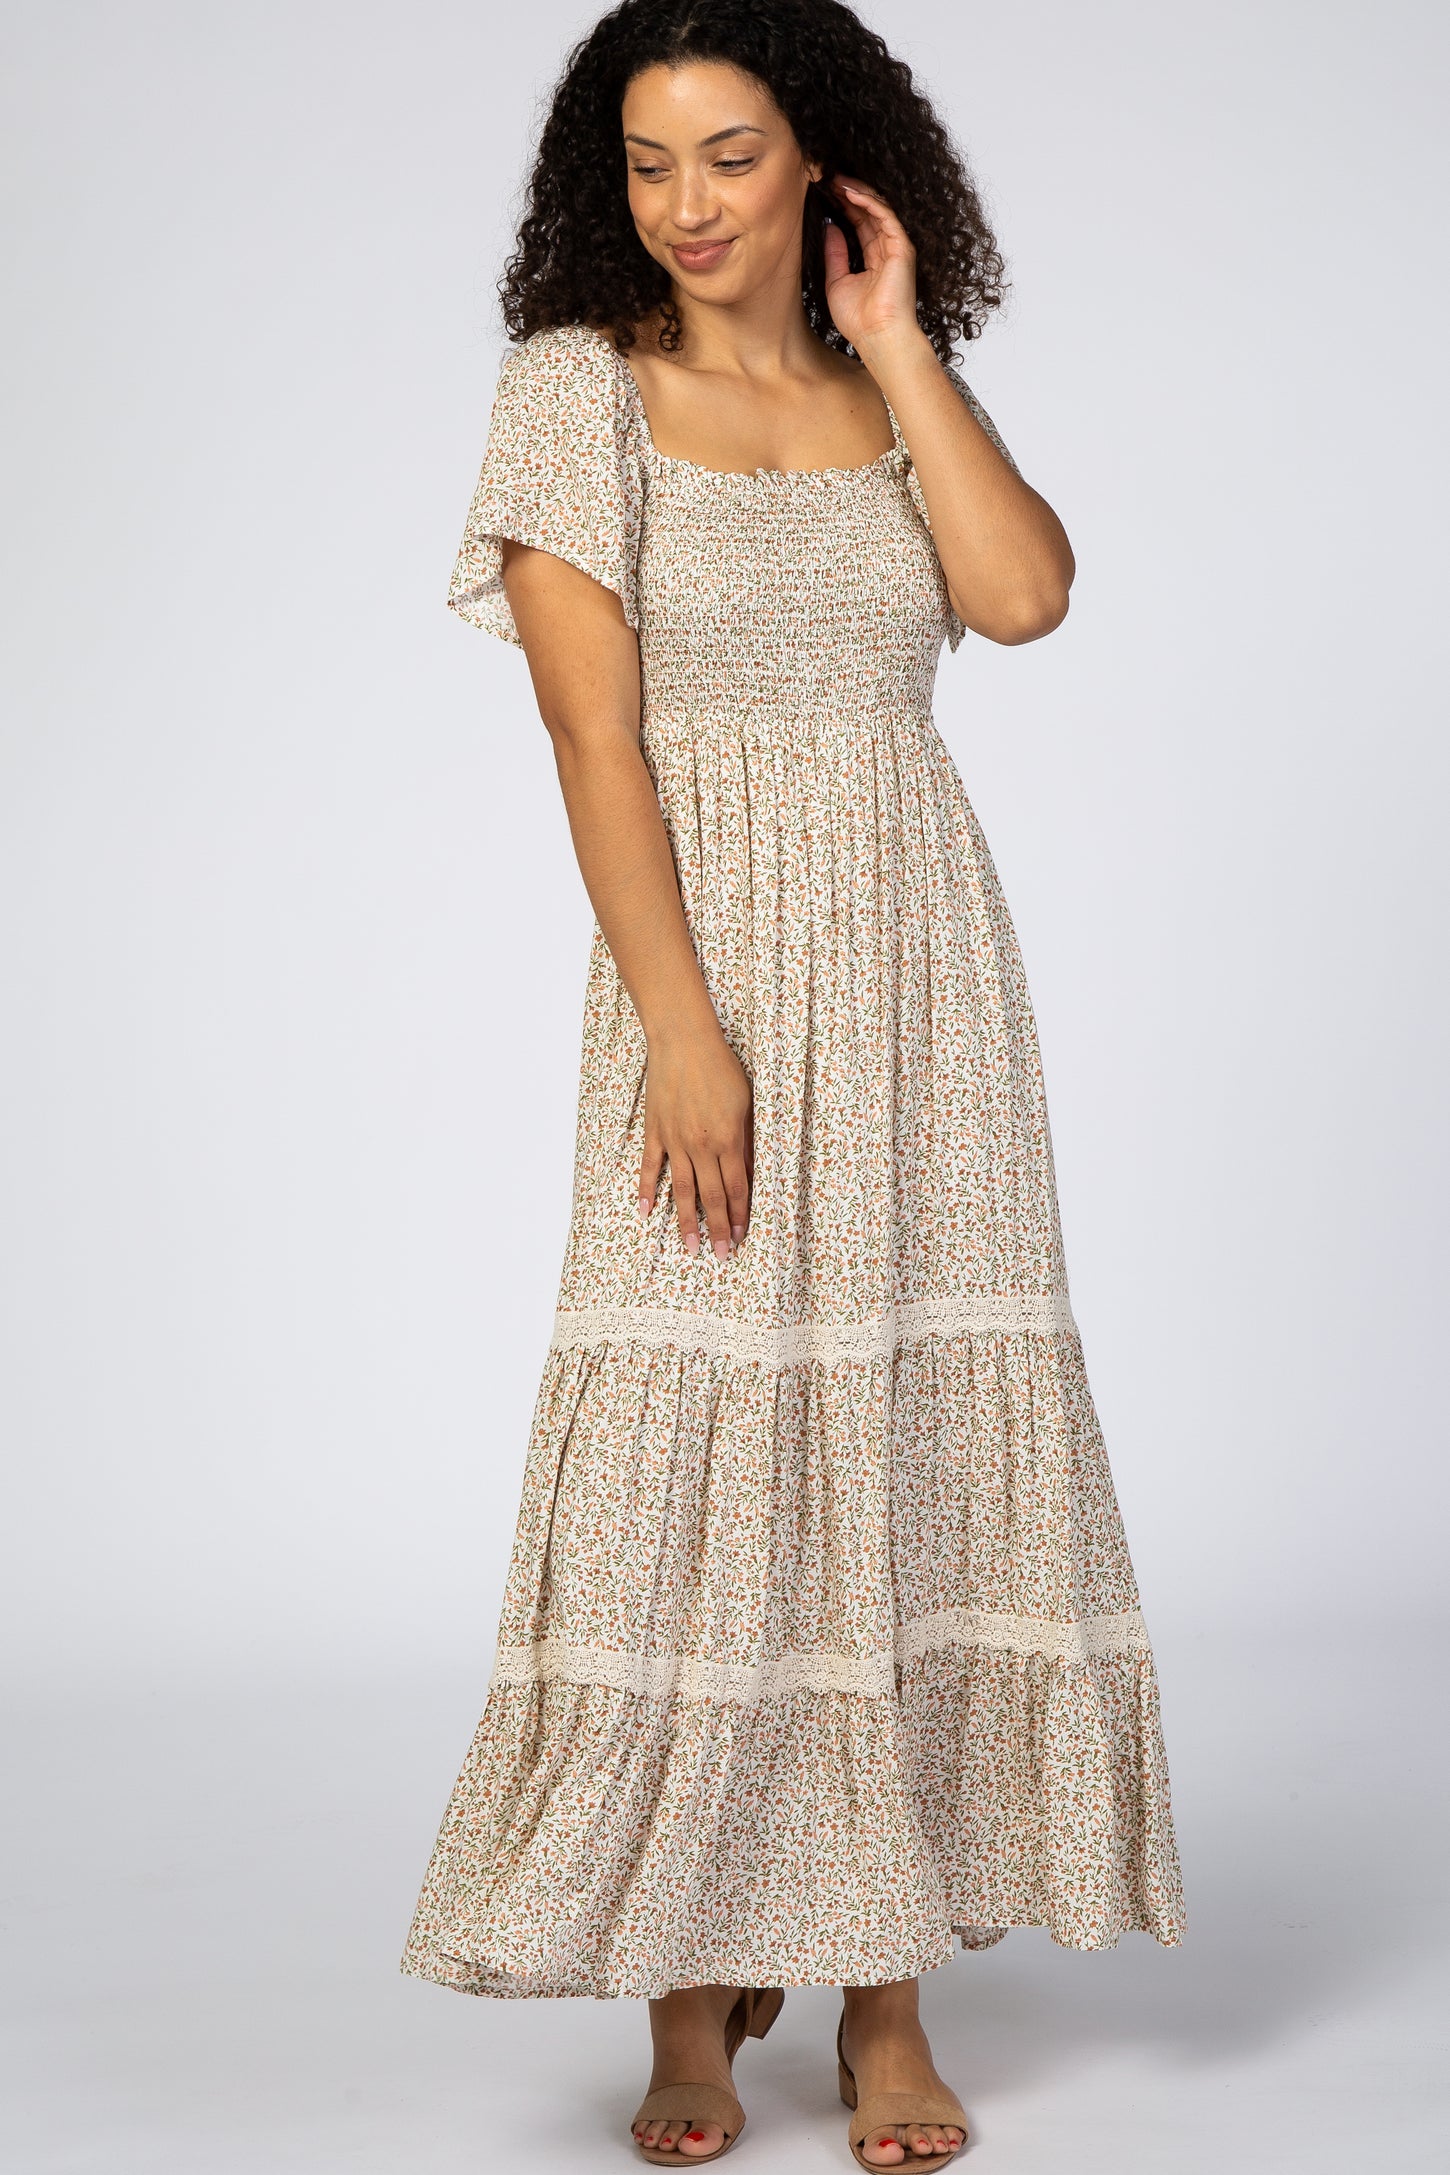 Ivory Floral Square Neck Smocked Front Lace Trim Maxi Dress– PinkBlush